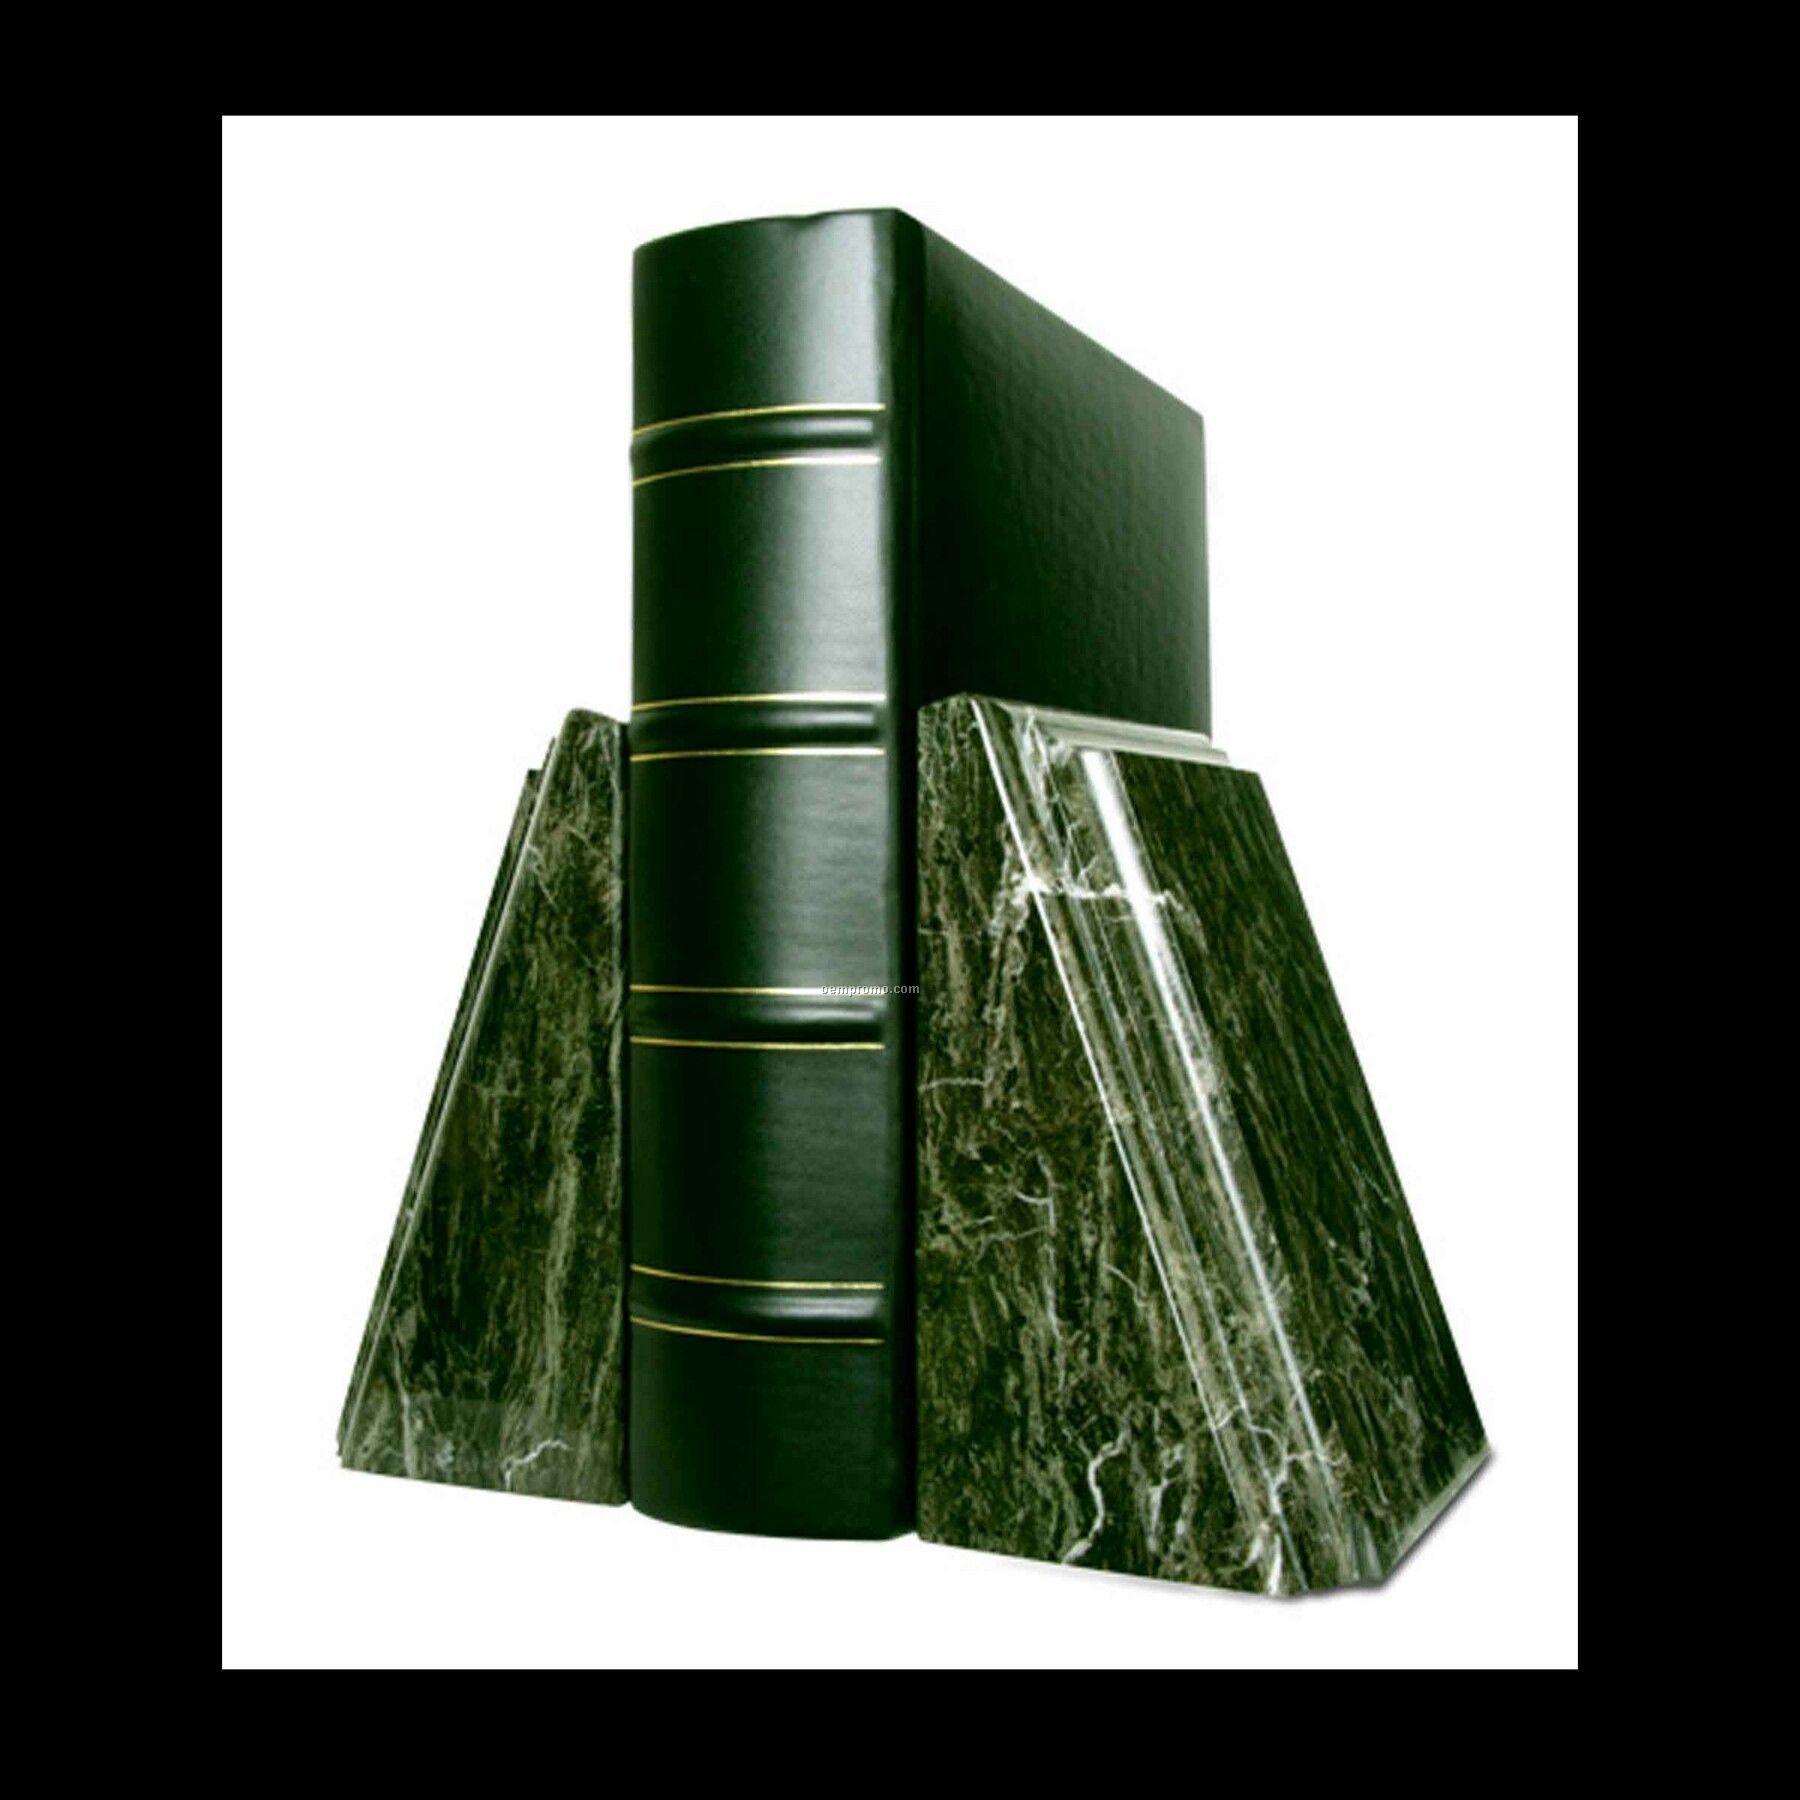 5" Black Marble Book Ends W/ Bevel